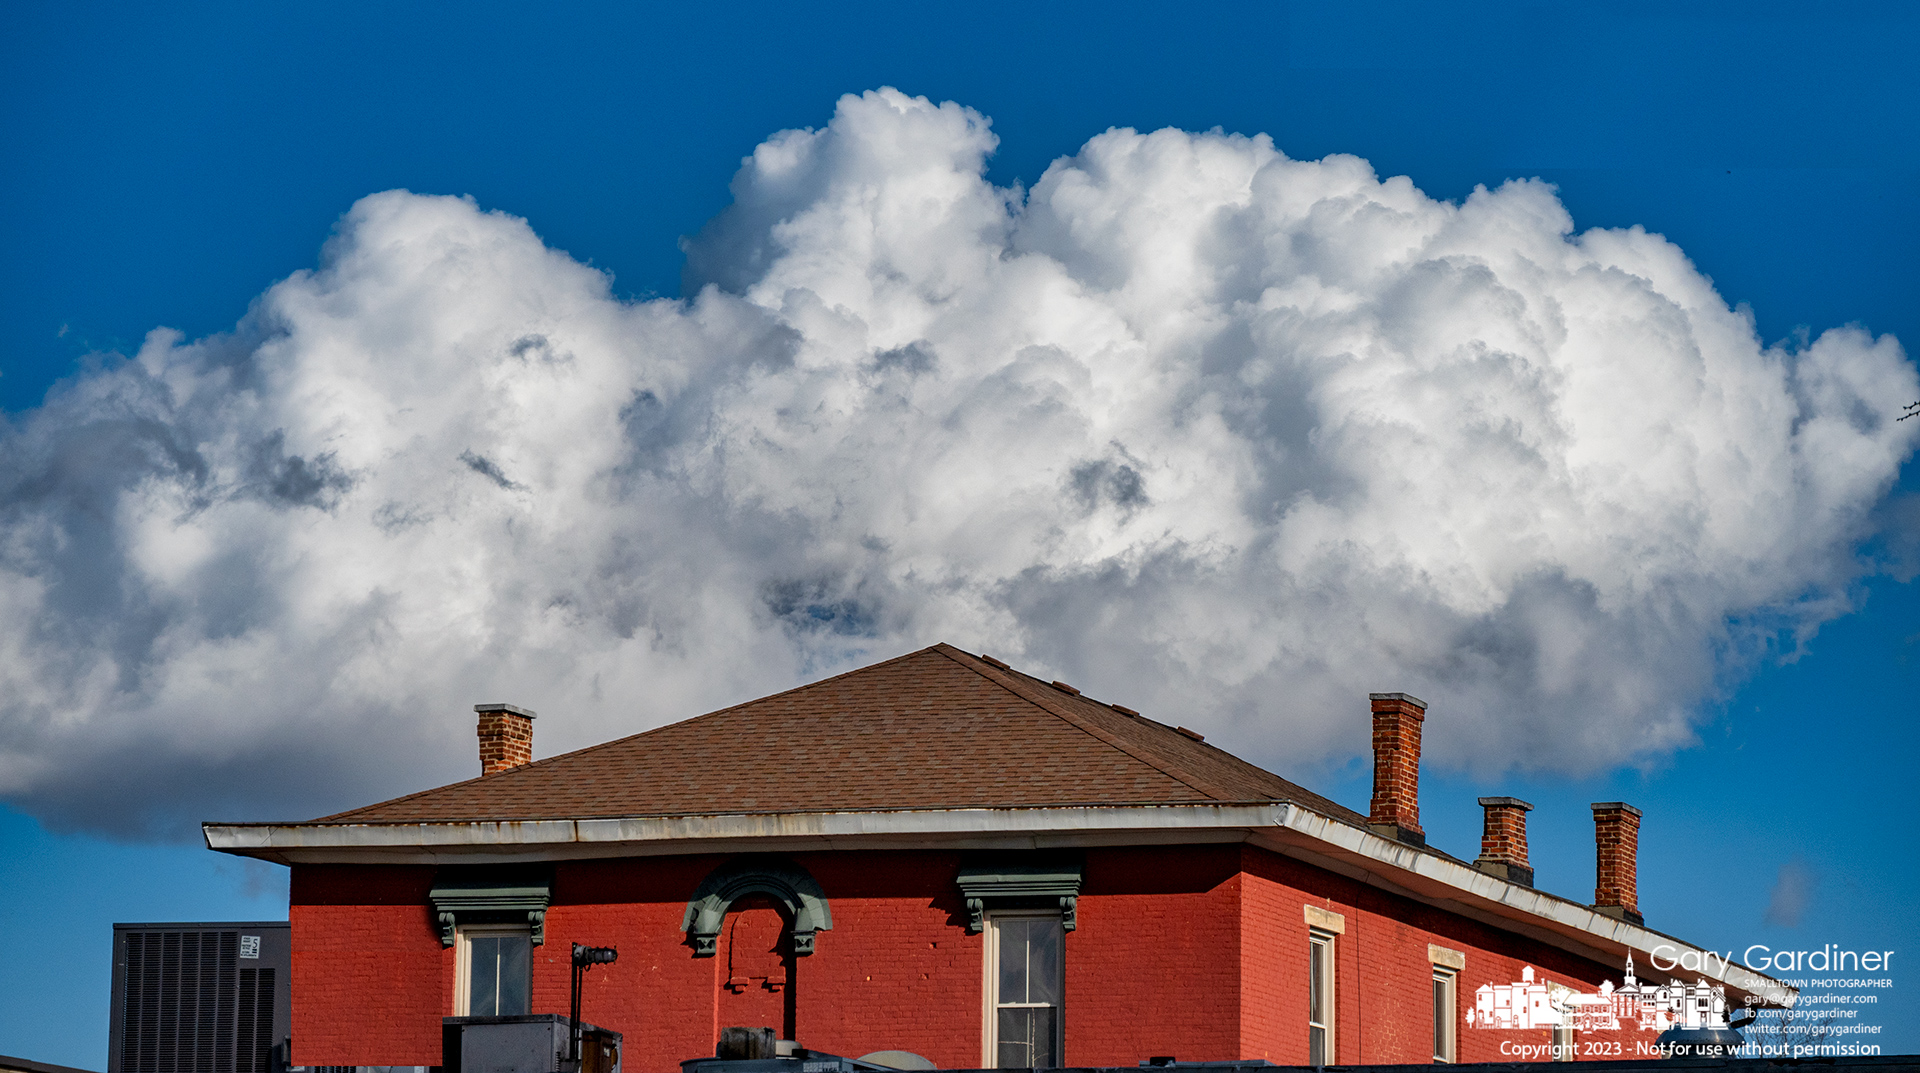 An afternoon cloud moves across the eastern sky appearing to float over buildings in Uptown Westerville but marking the beginning of a strong wind storm and cooler temperatures. My Final Photo for January 19, 2023.